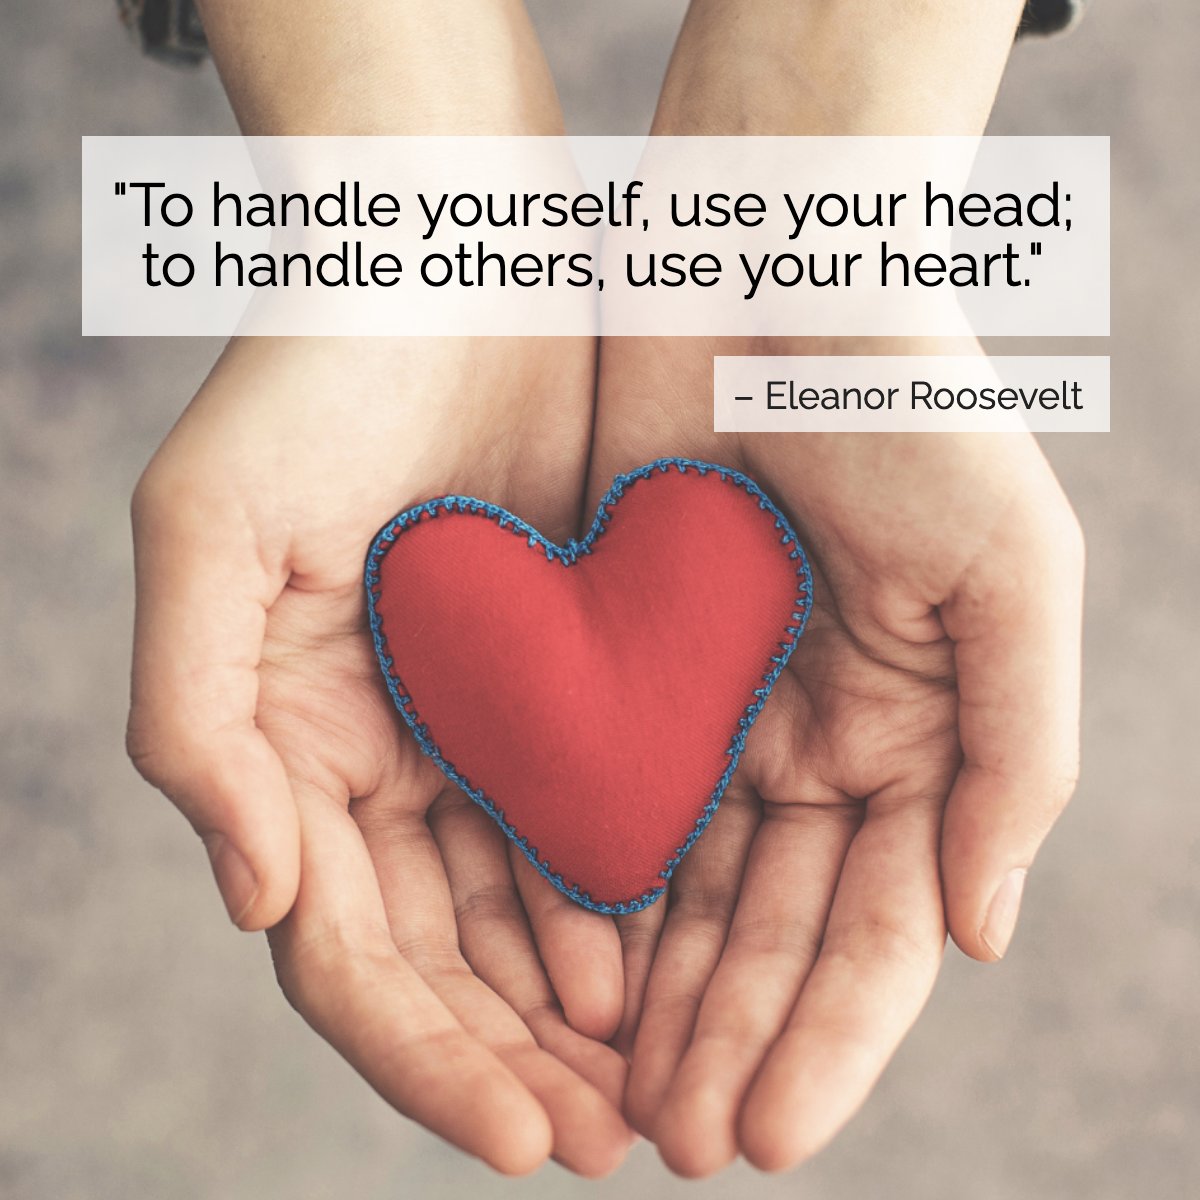 Eleanor Roosevelt was an American political figure, diplomat, and activist. She served as the first lady of the United States from 1933 to 1945! #inspiring #quote #eleanorroosevelt #inspirational #RacingRealEstateAgent #BarrettRealEstate #StoneTreeRealEstateTeam